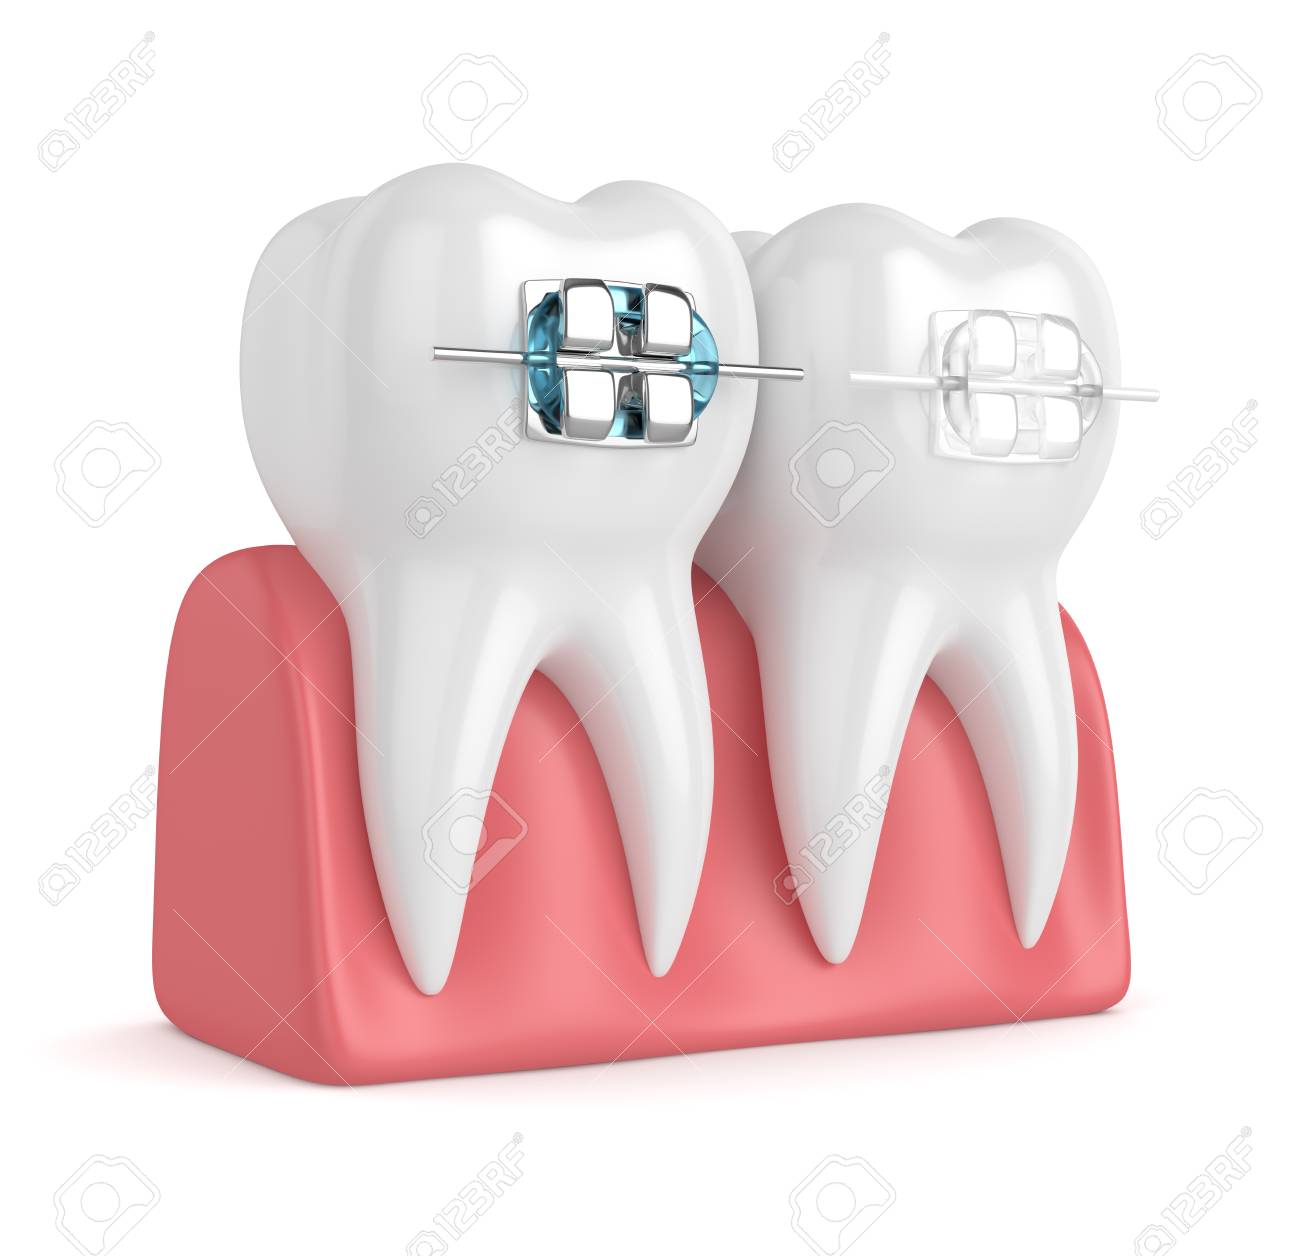 3d Render Of Teeth With Ceramic And Metal Braces In Gums Isolated